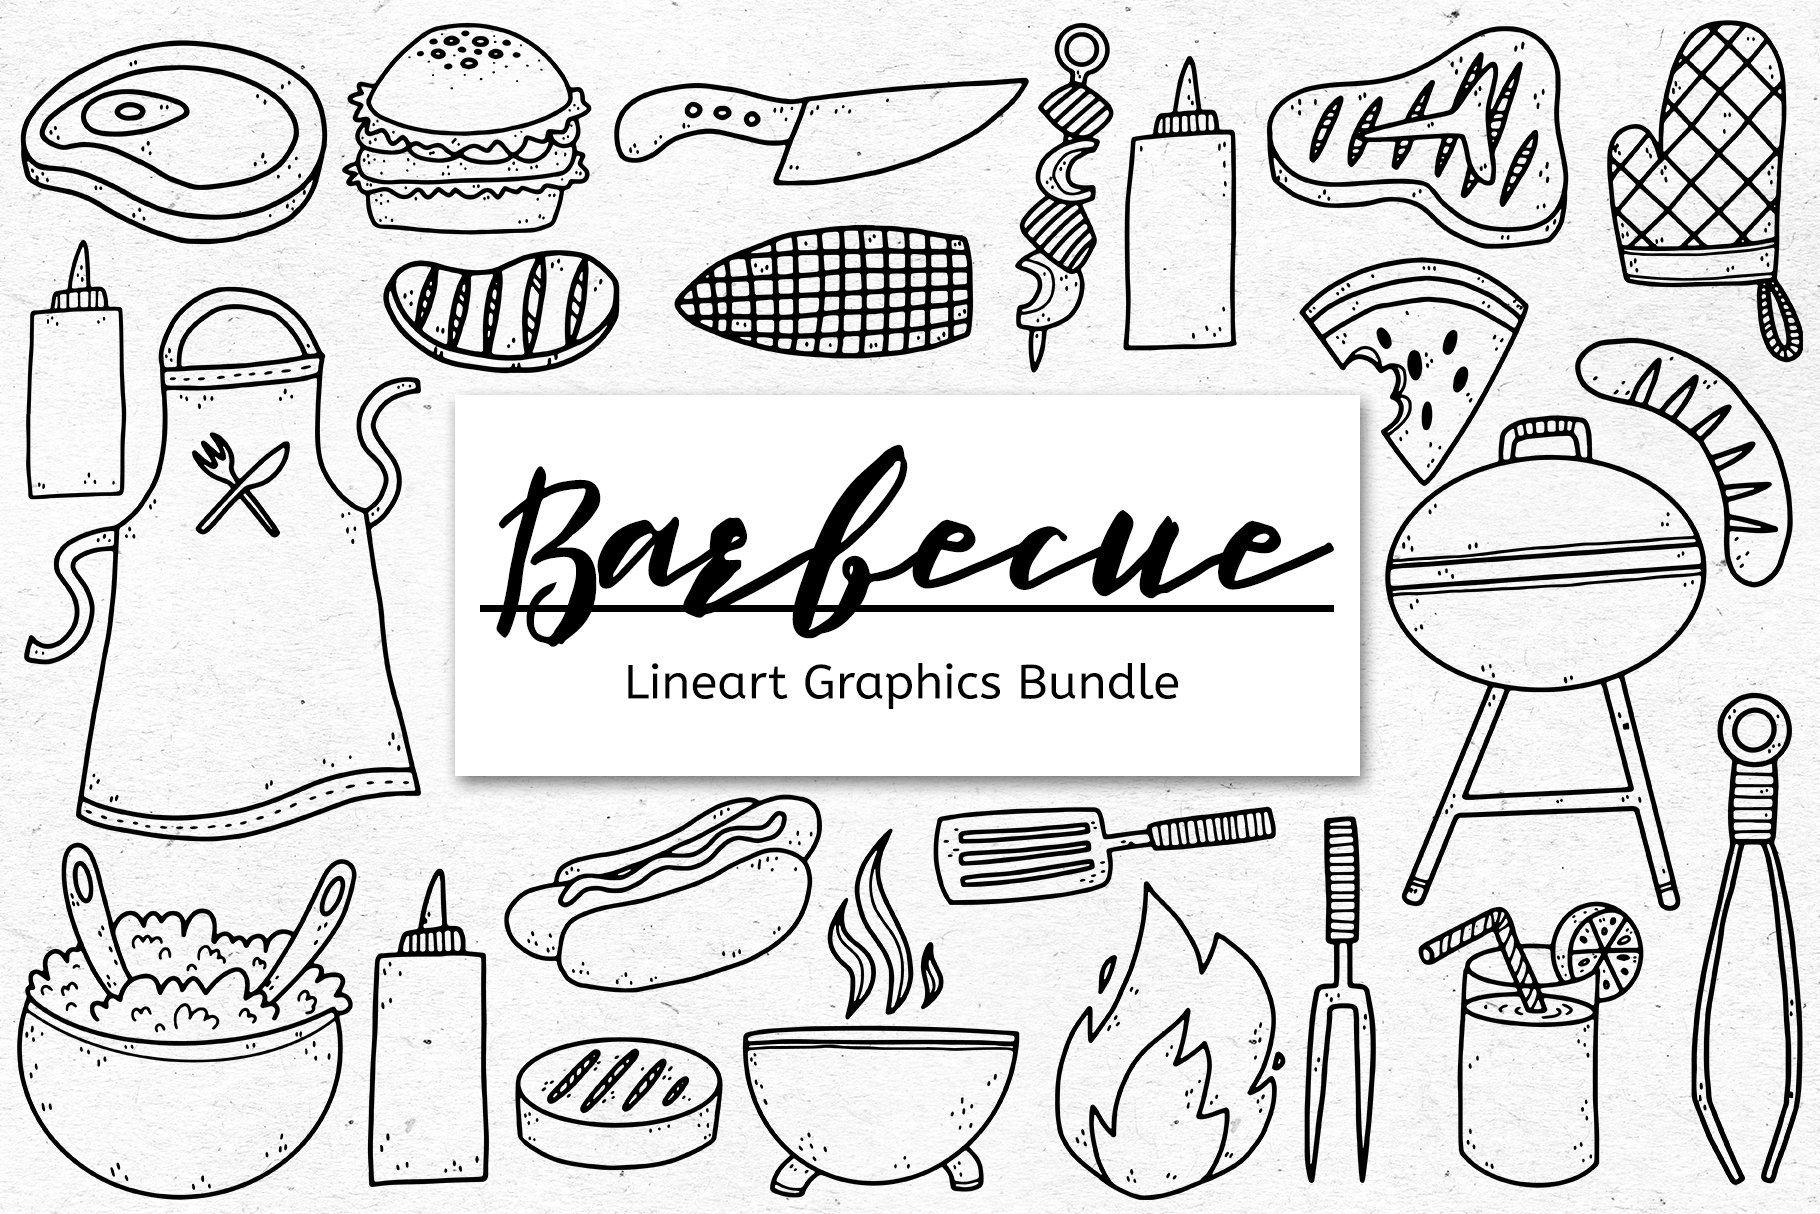 Barbecue Lineart Graphics Bundle cover image.